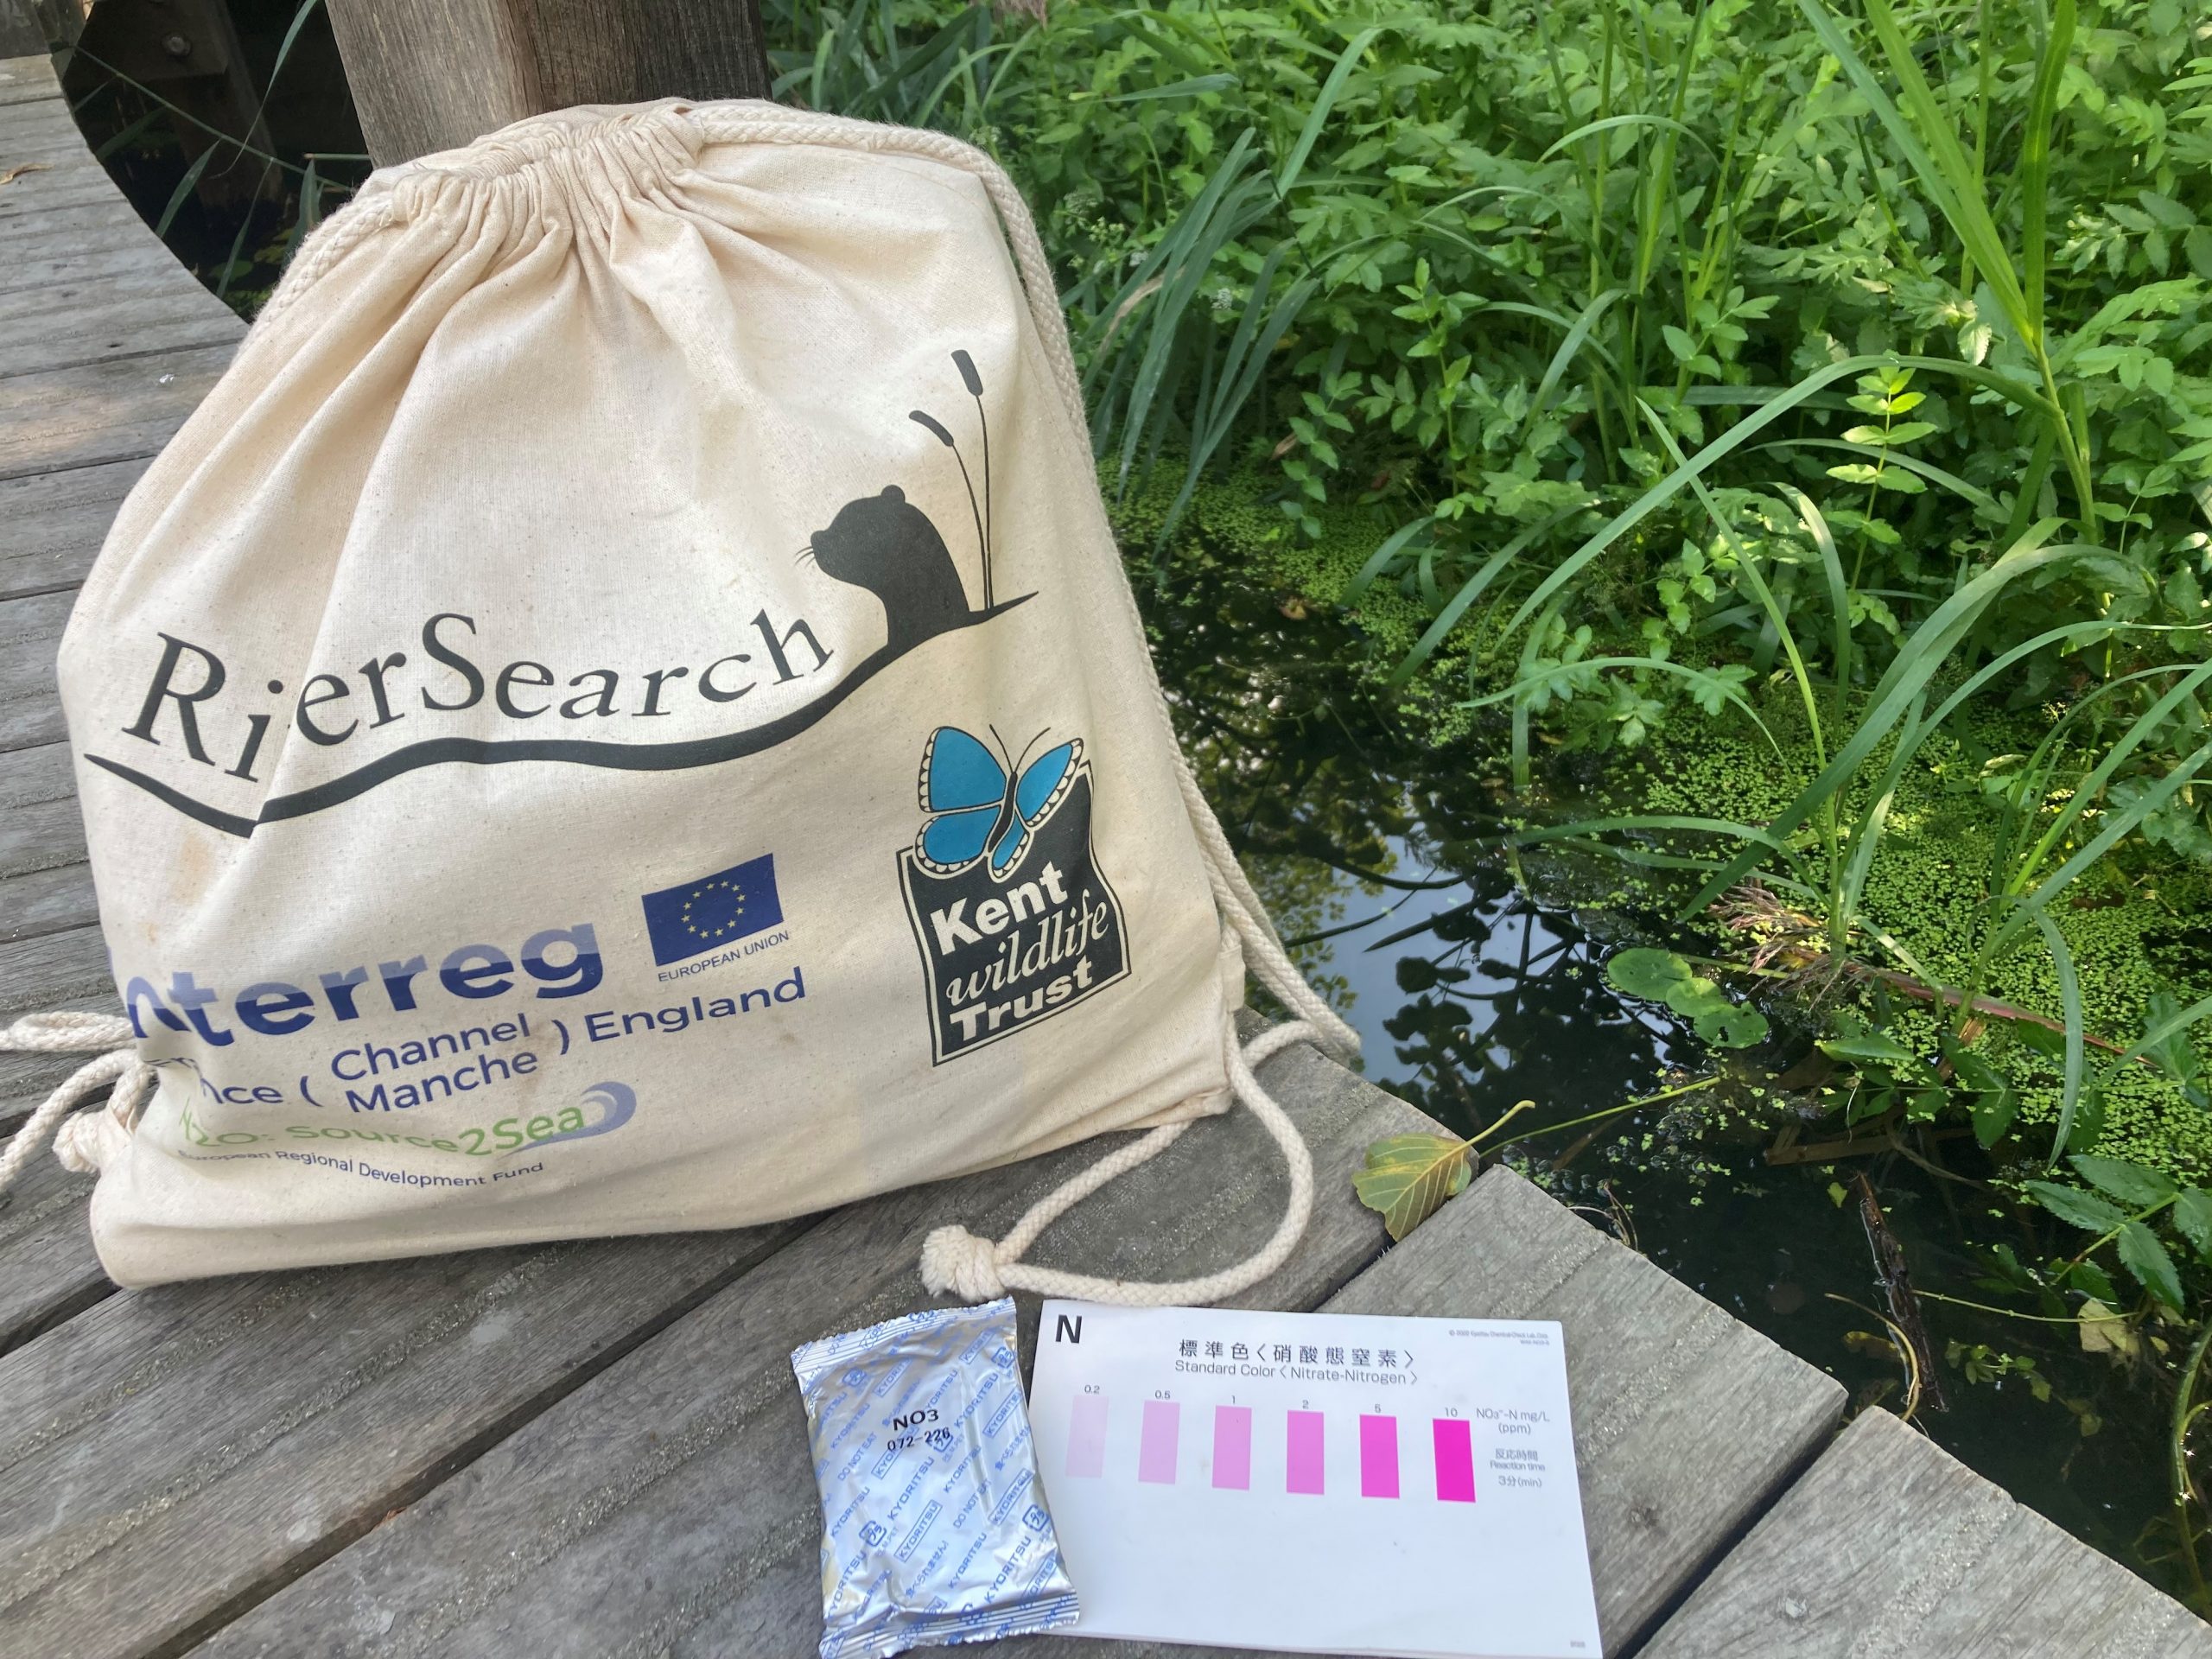 Kent Wildlife Trust River Search bag and nitrogen measurement card next to a stream.